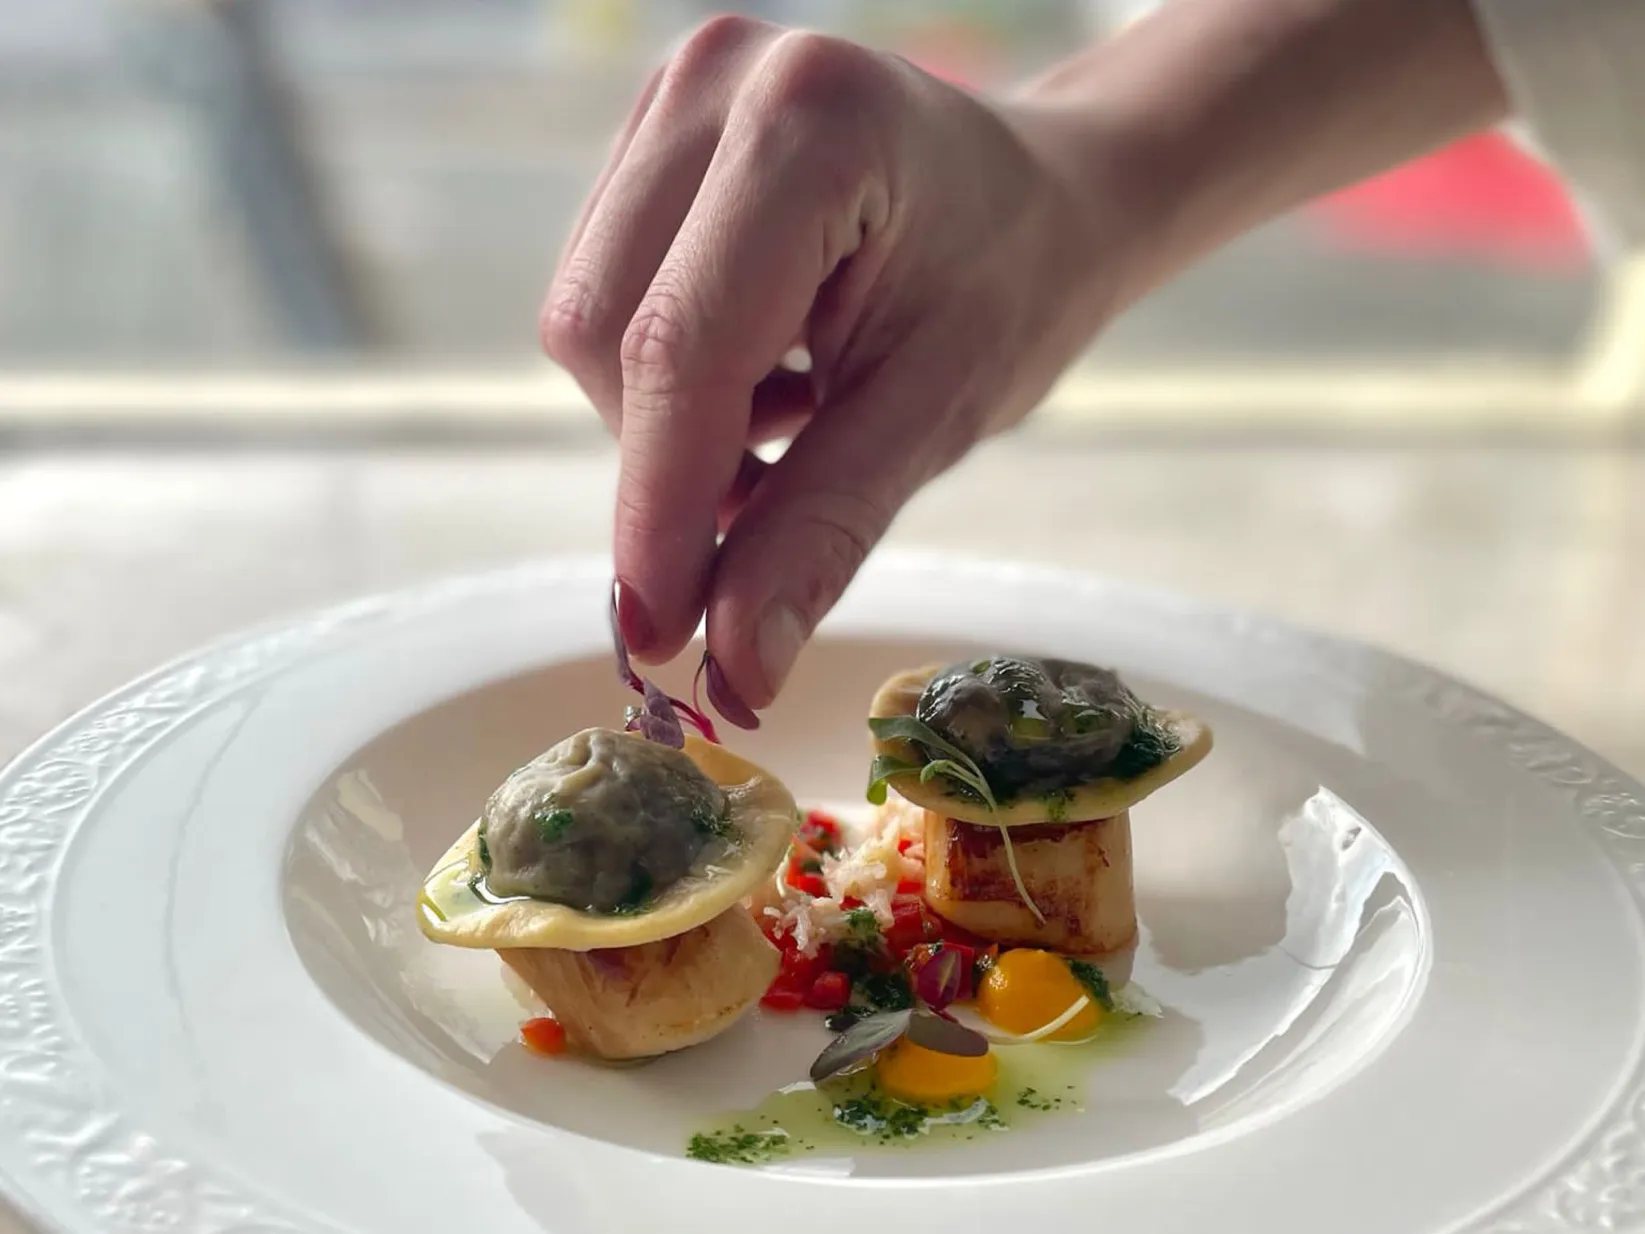 A hand putting micro herbs onto a white plate of food (scallops and tortellini).